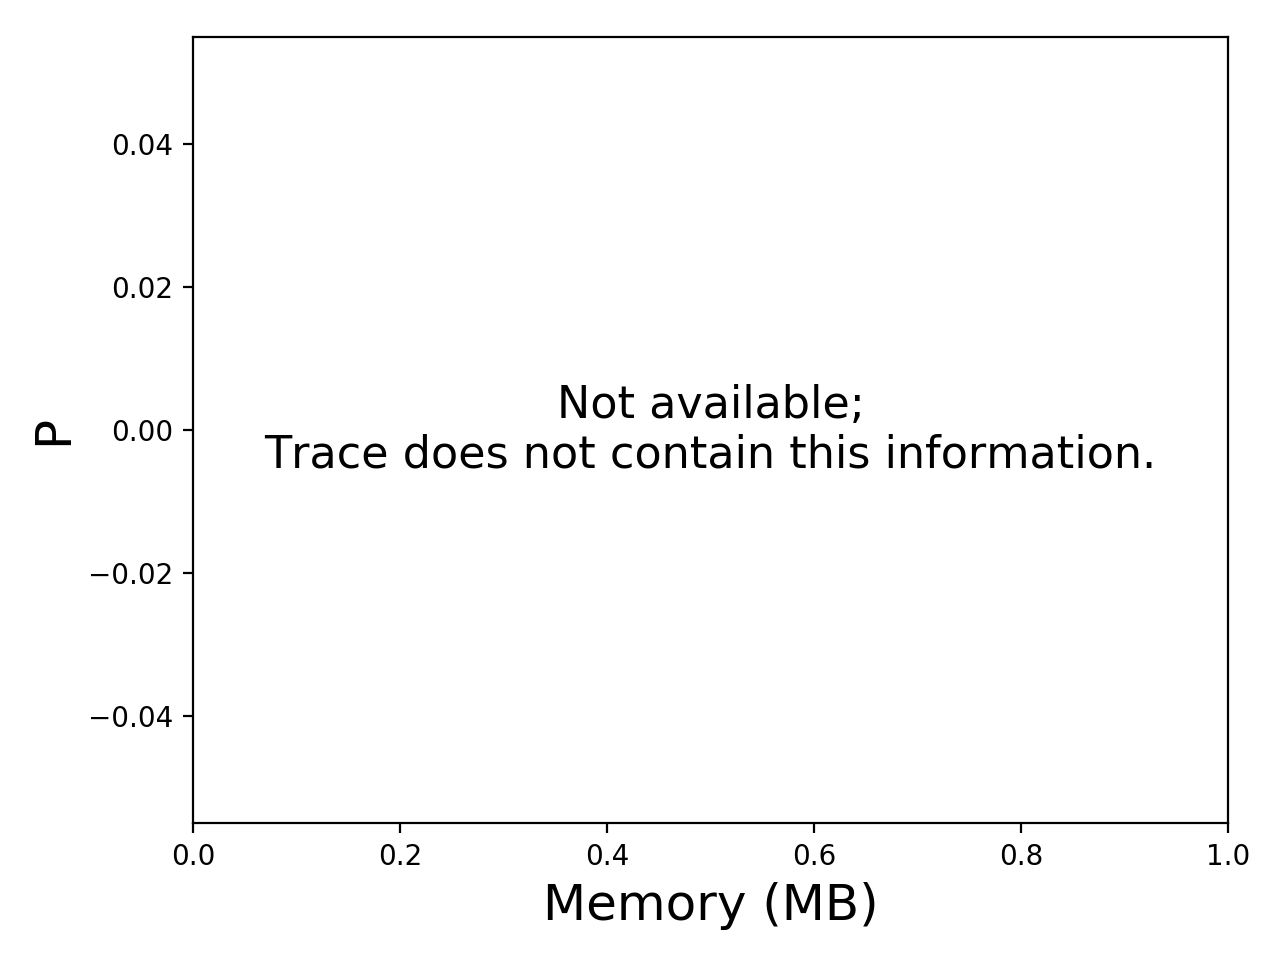 Task memory consumption graph for the spec_trace-2 trace.